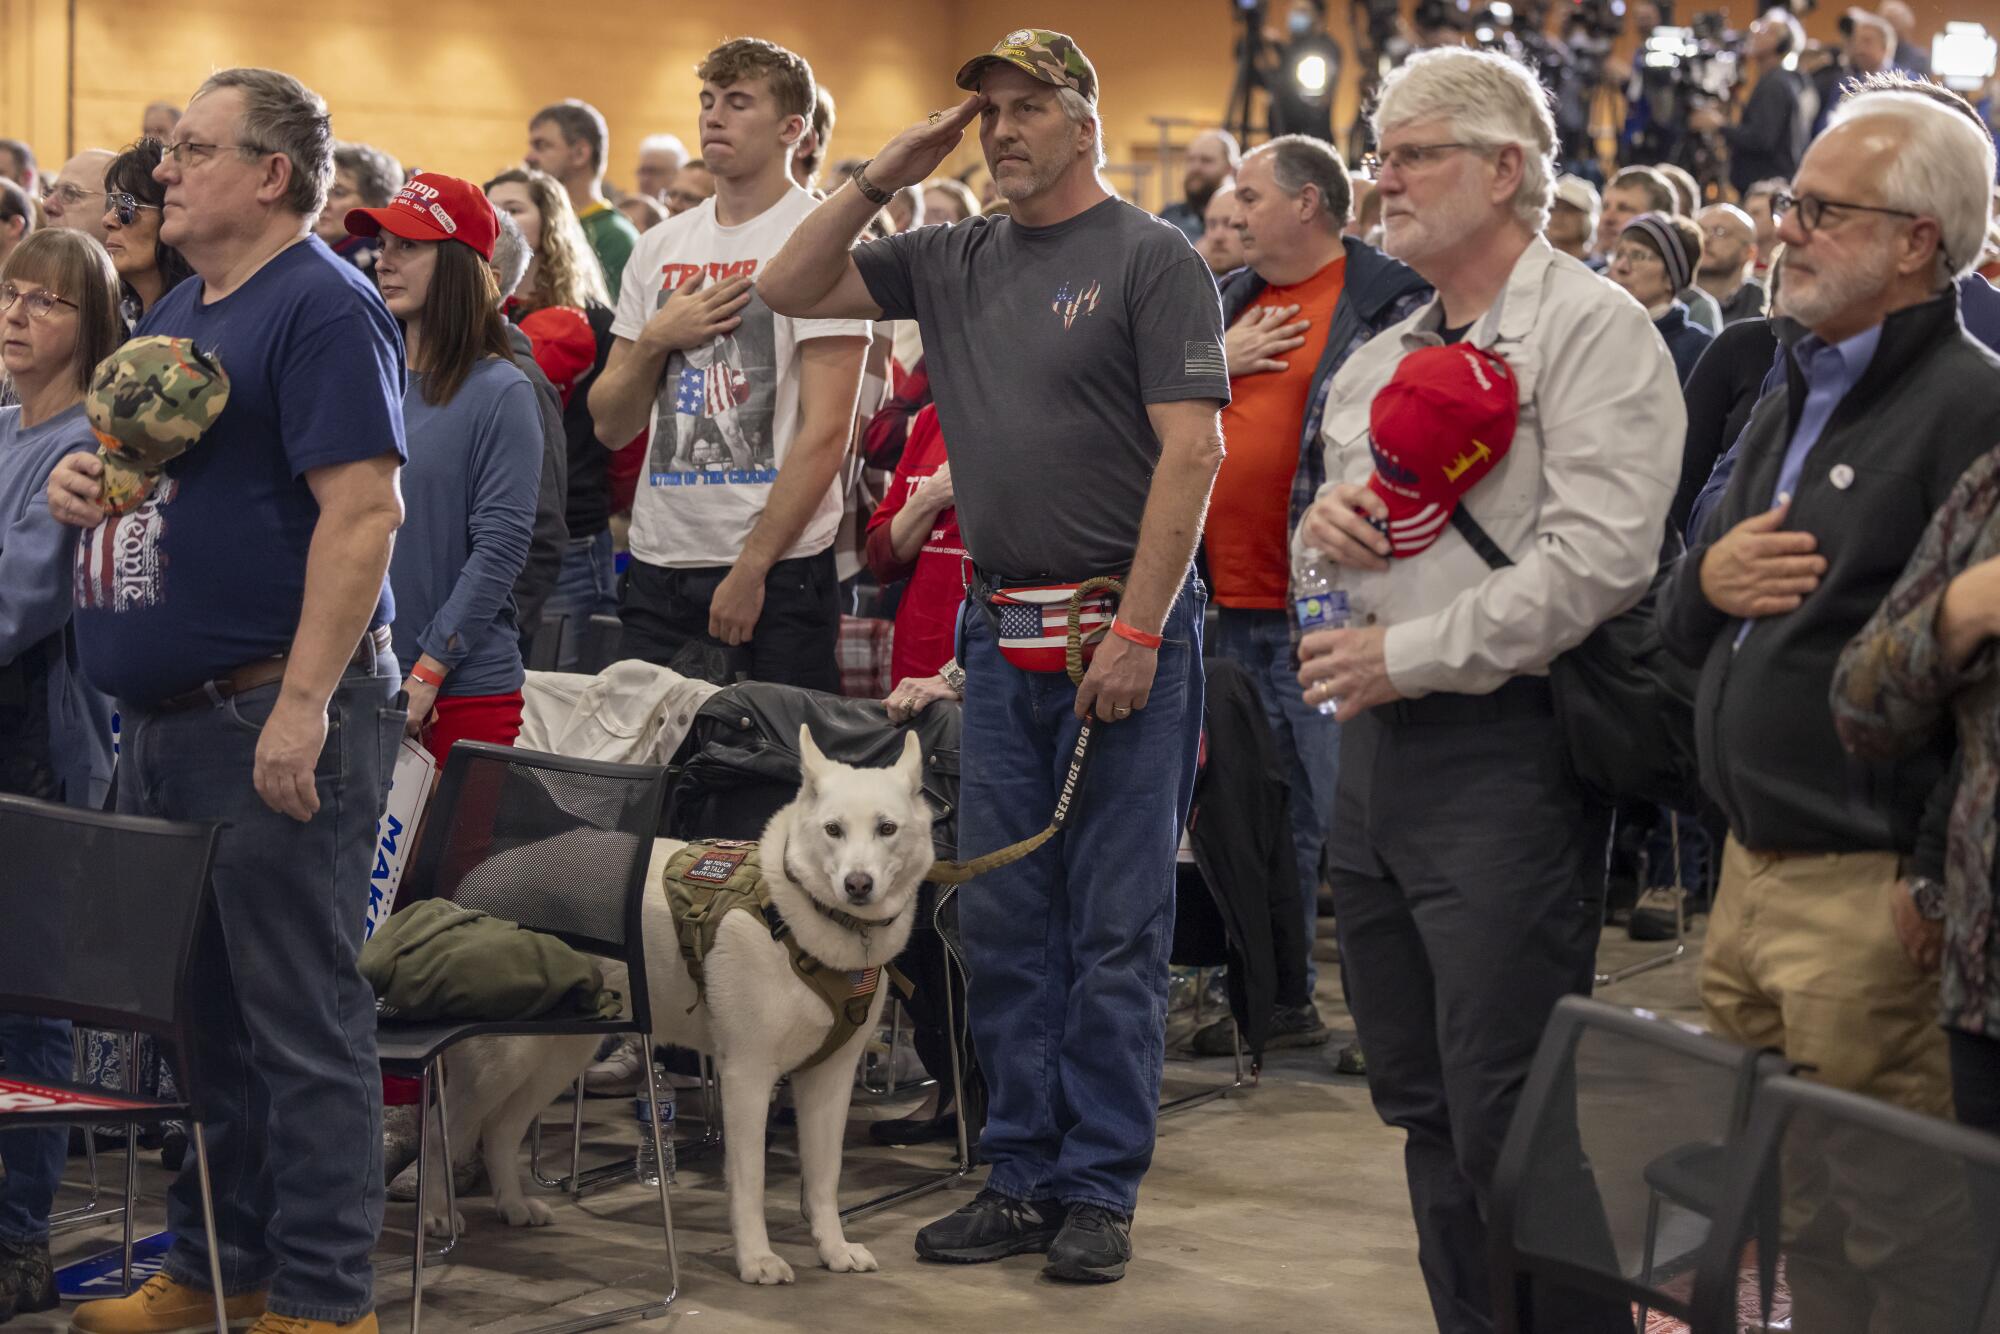 A crowd standing, some in Trump hats or shirts, most with hands and hats on their hearts, as one man with a white dog salutes